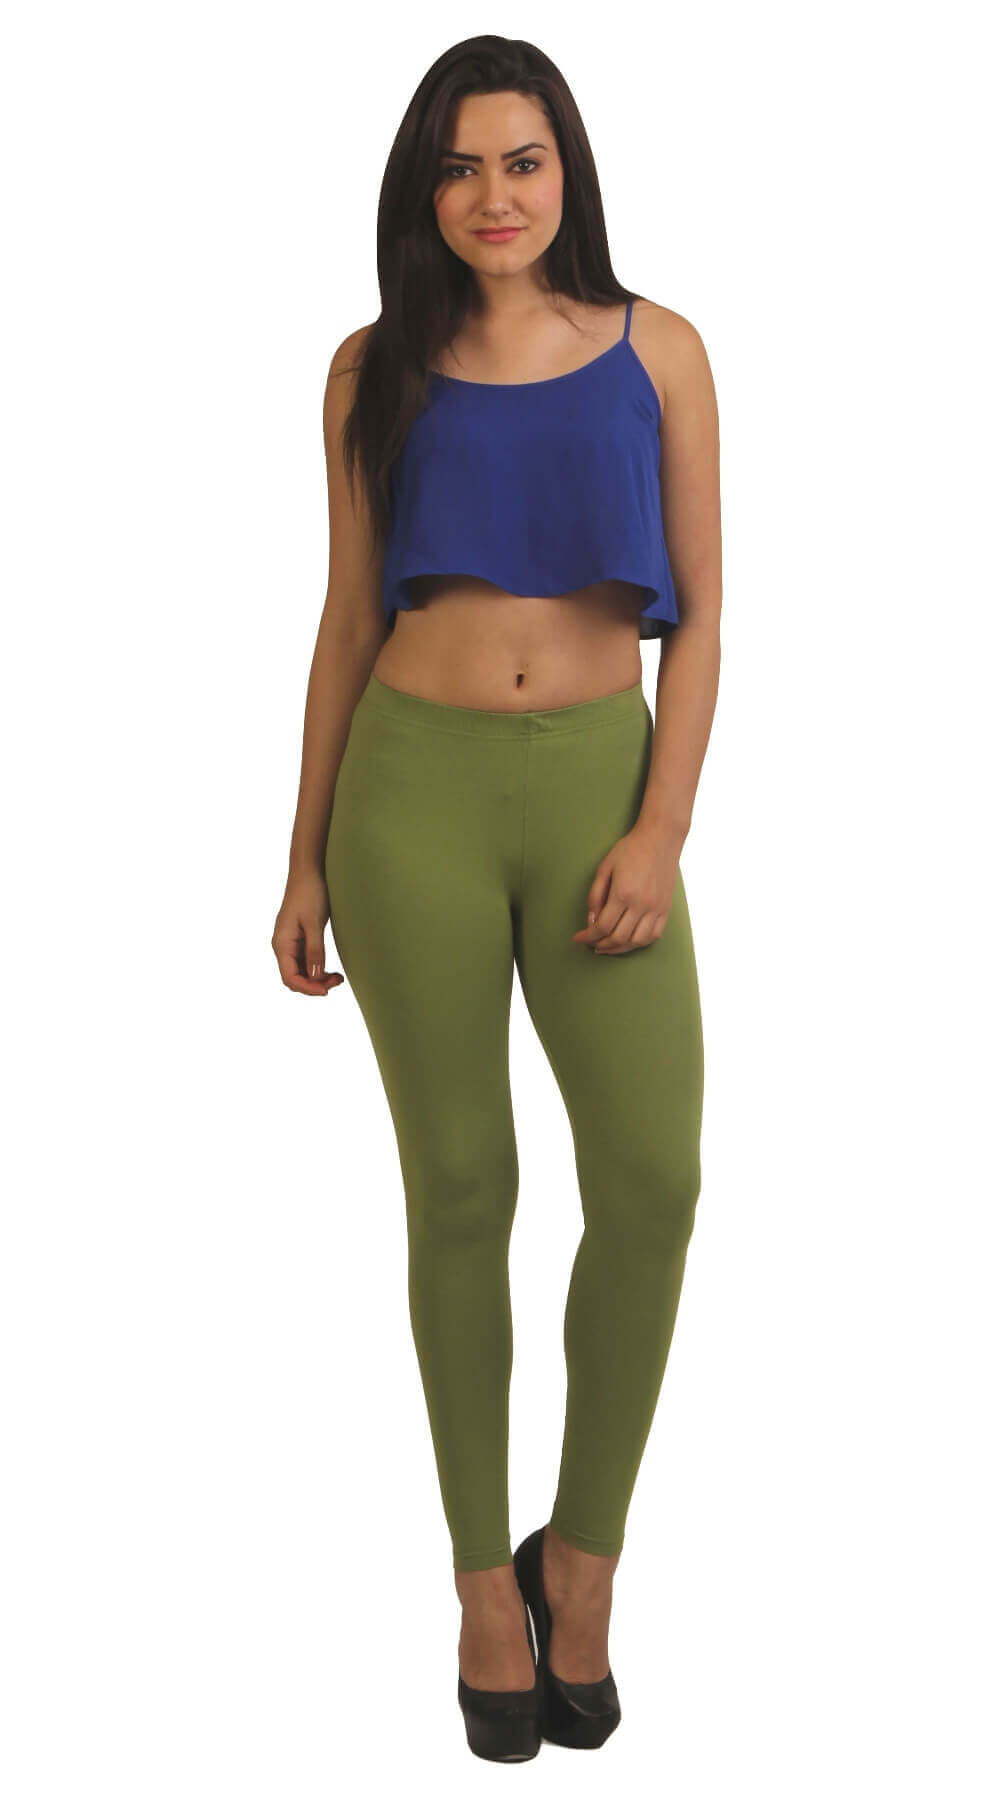 Frenchtrendz Cotton Spandex Parrot Green Ankle Leggings